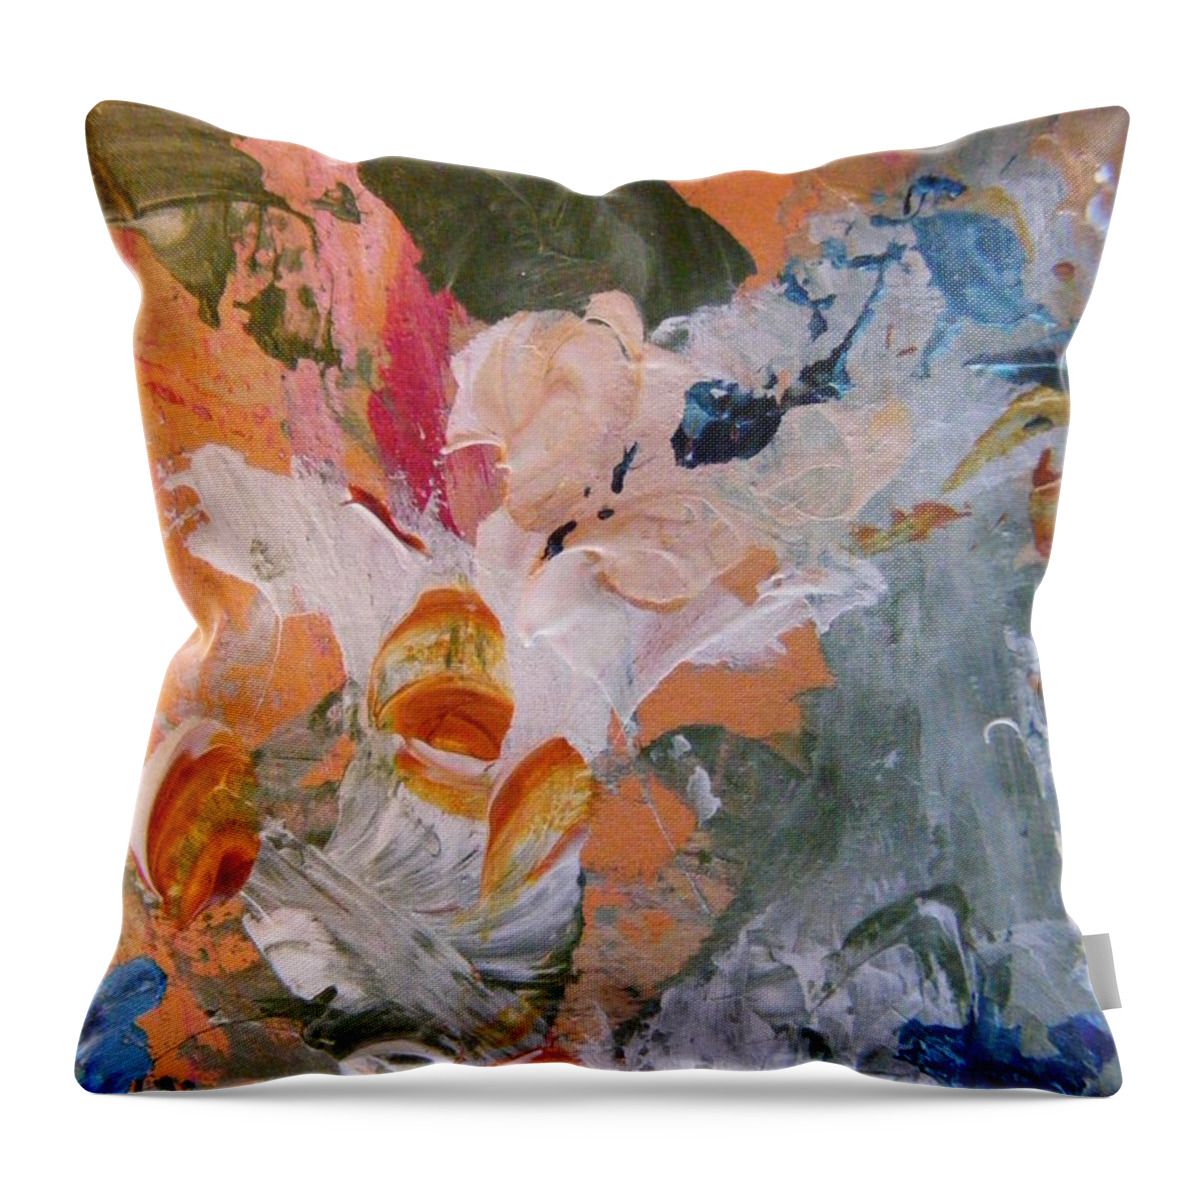 Abstract Flower Painting Throw Pillow featuring the painting Spring 2 by Nancy Kane Chapman